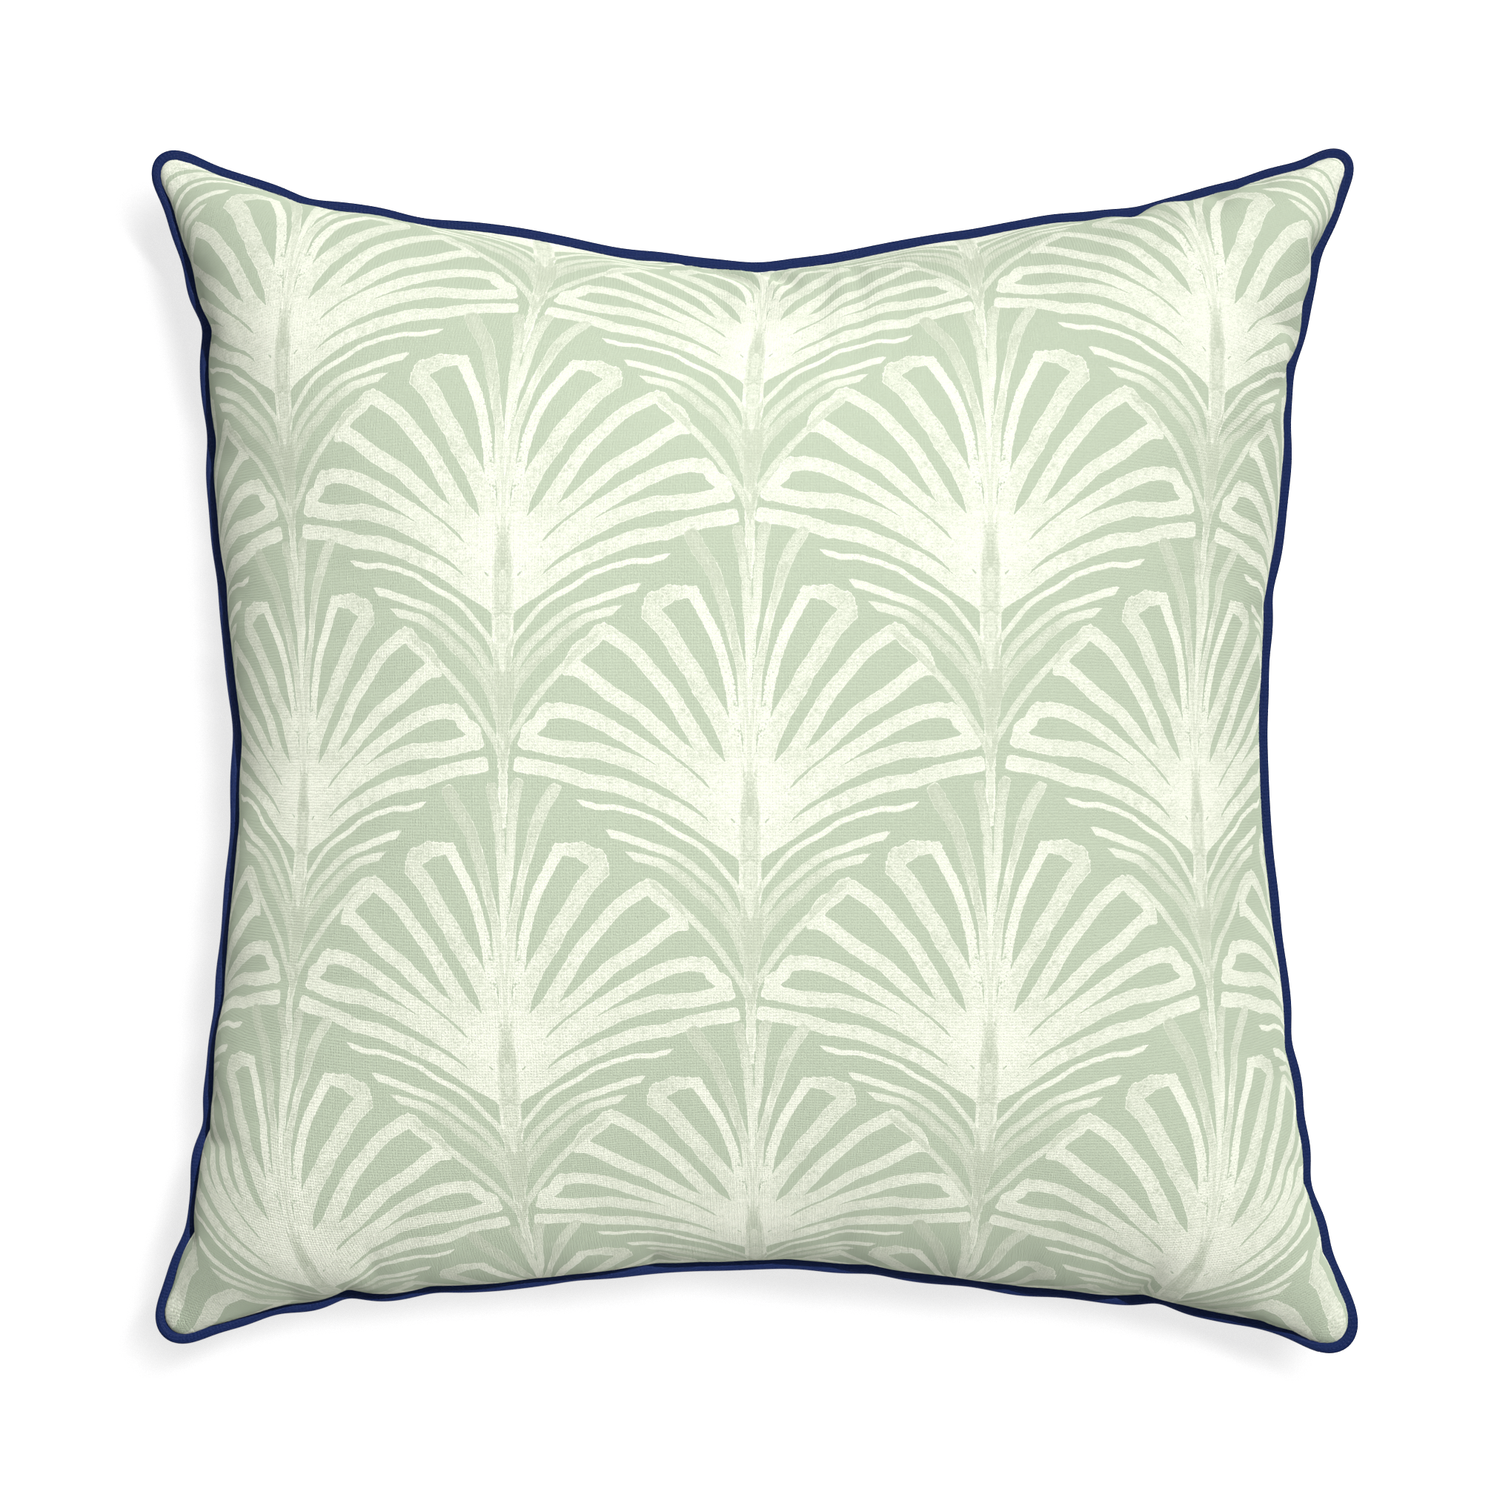 Euro-sham suzy sage custom pillow with midnight piping on white background